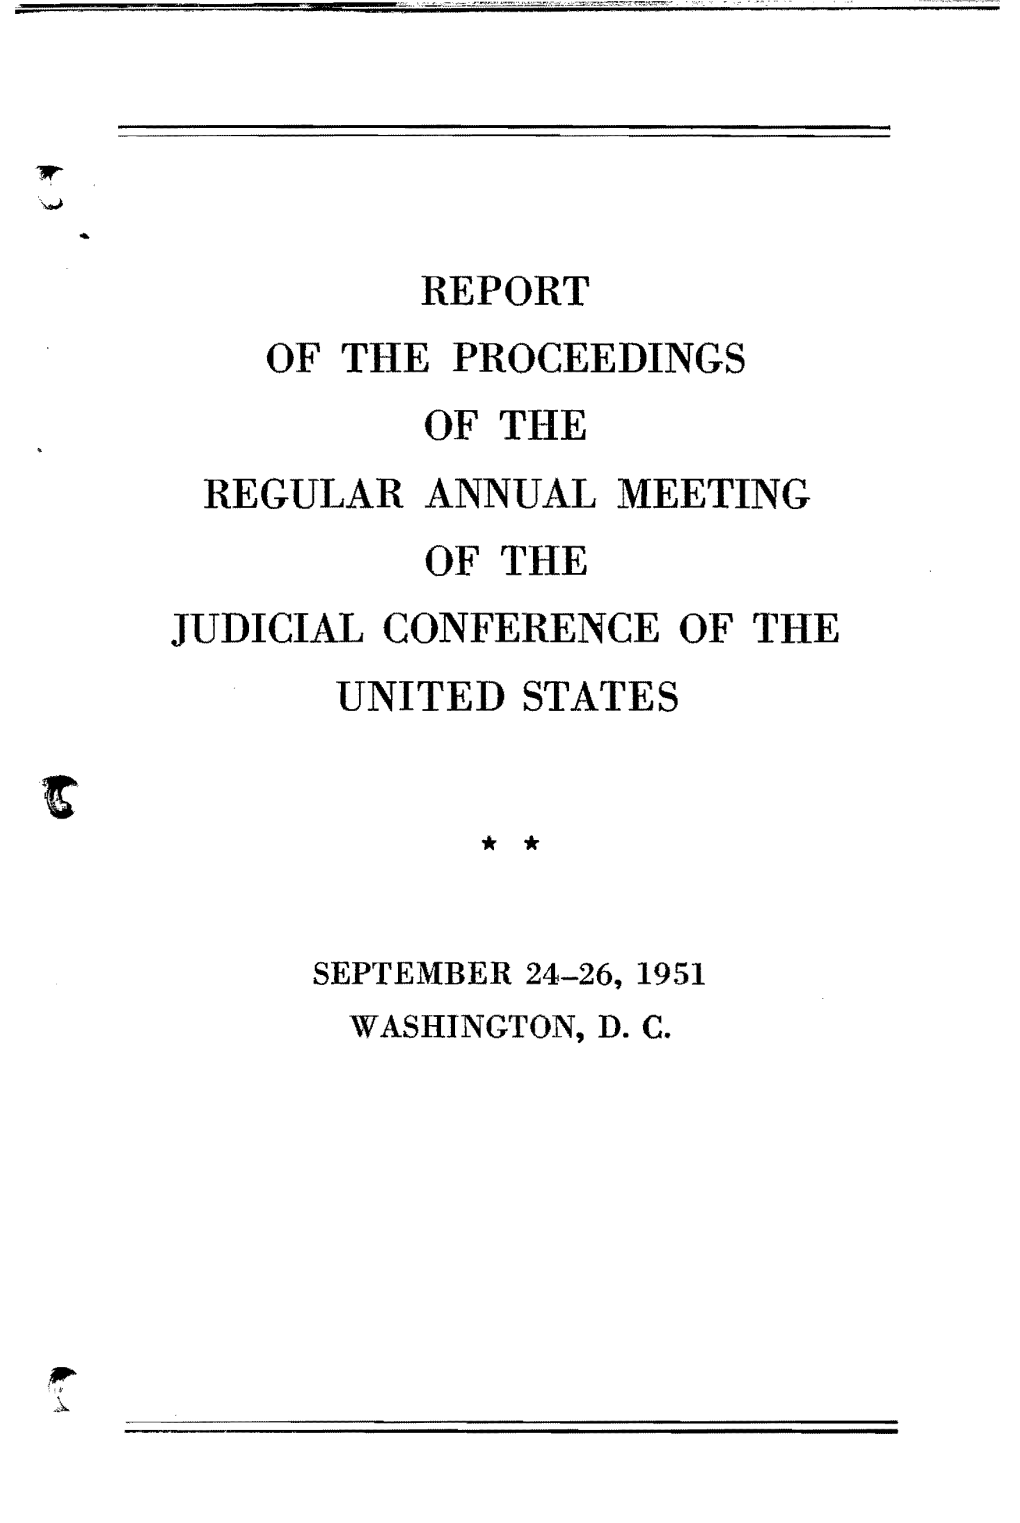 Report of the Proceedings of the Regular Annual Meeting of the Judicial Conference of the United States